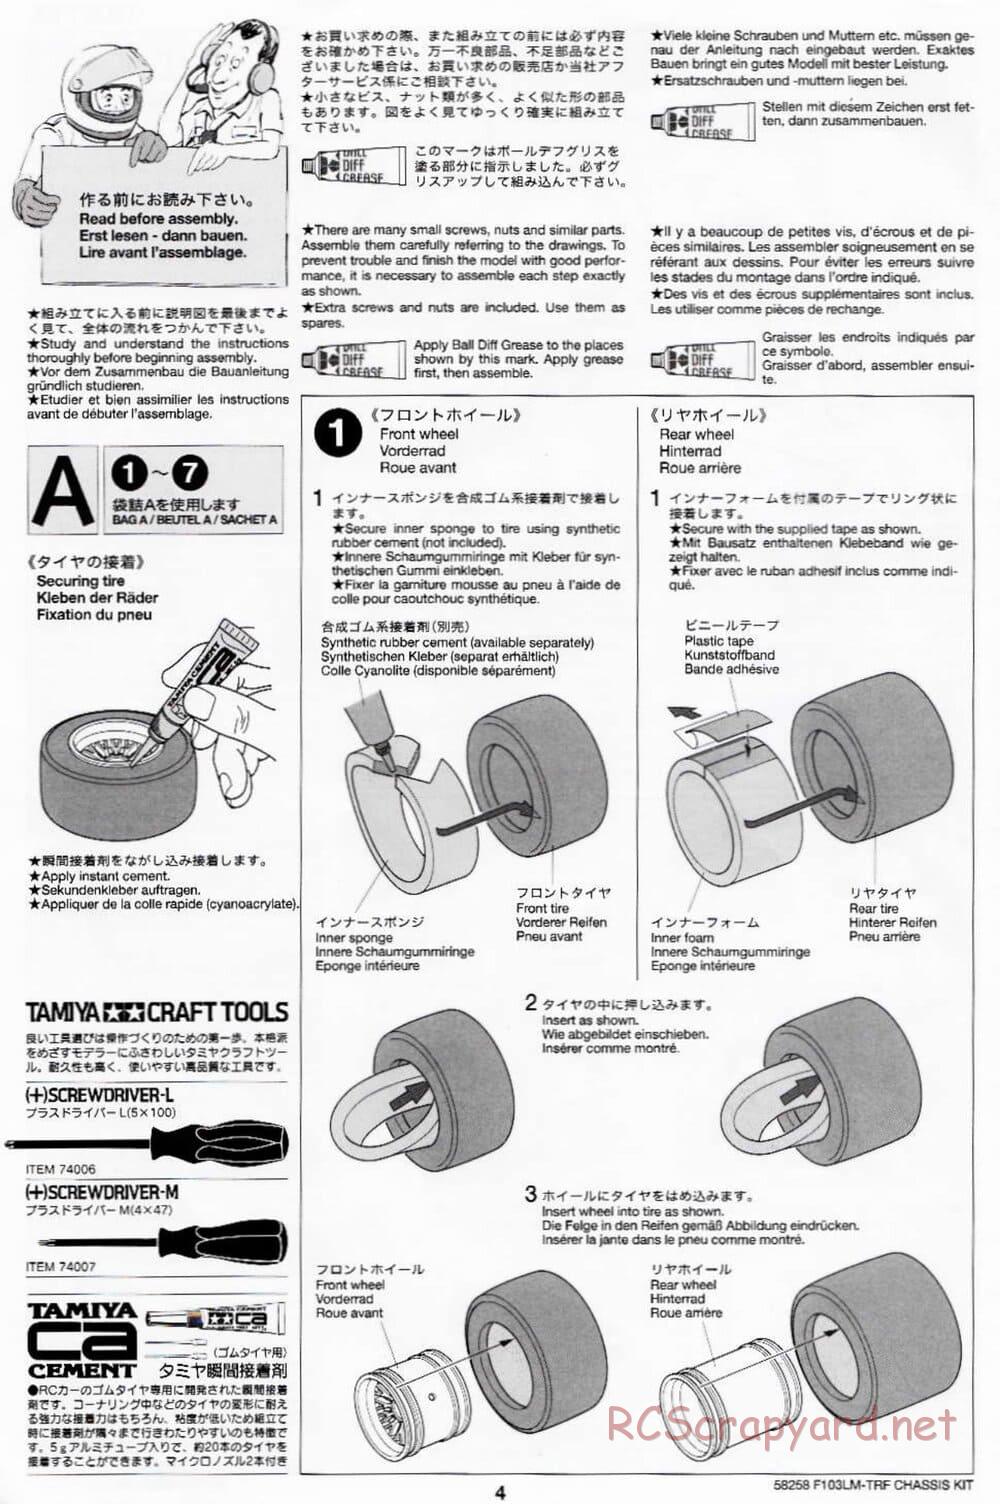 Tamiya - F103LM TRF Special Chassis - Manual - Page 4